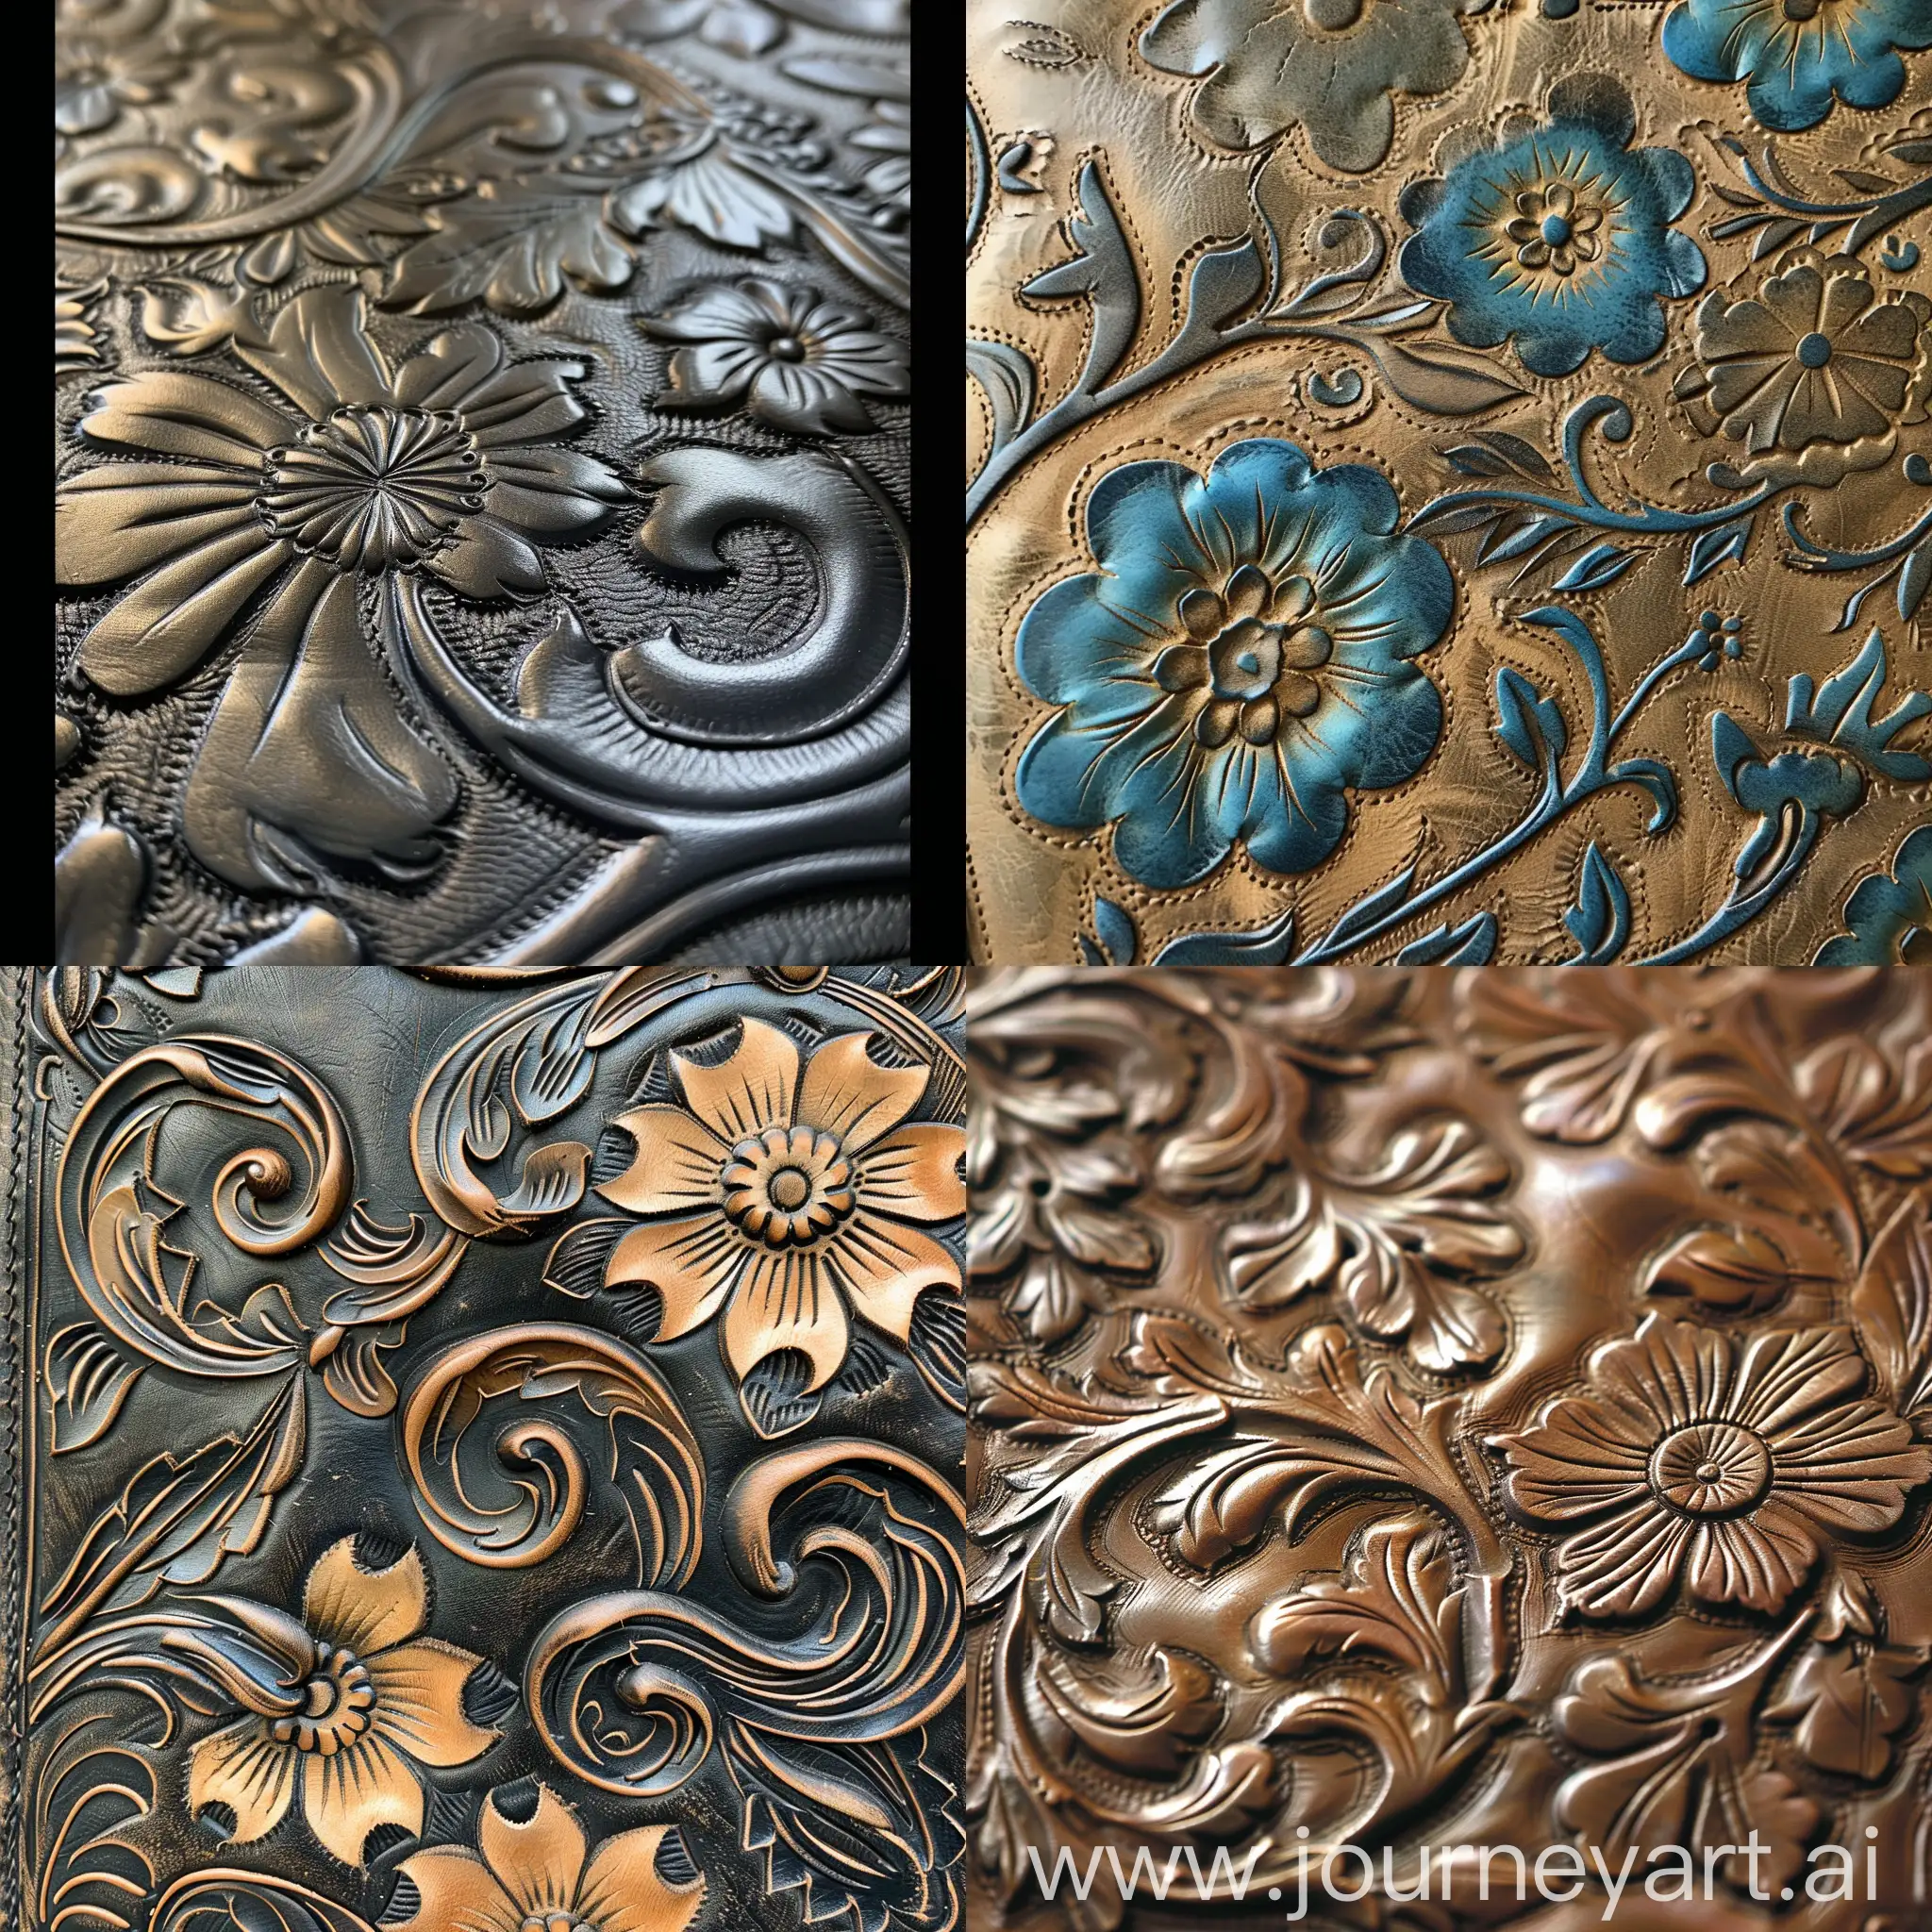 Exquisite-Tooled-Leather-Artwork-with-Intricate-Patterns-Versatile-61-Aspect-Ratio